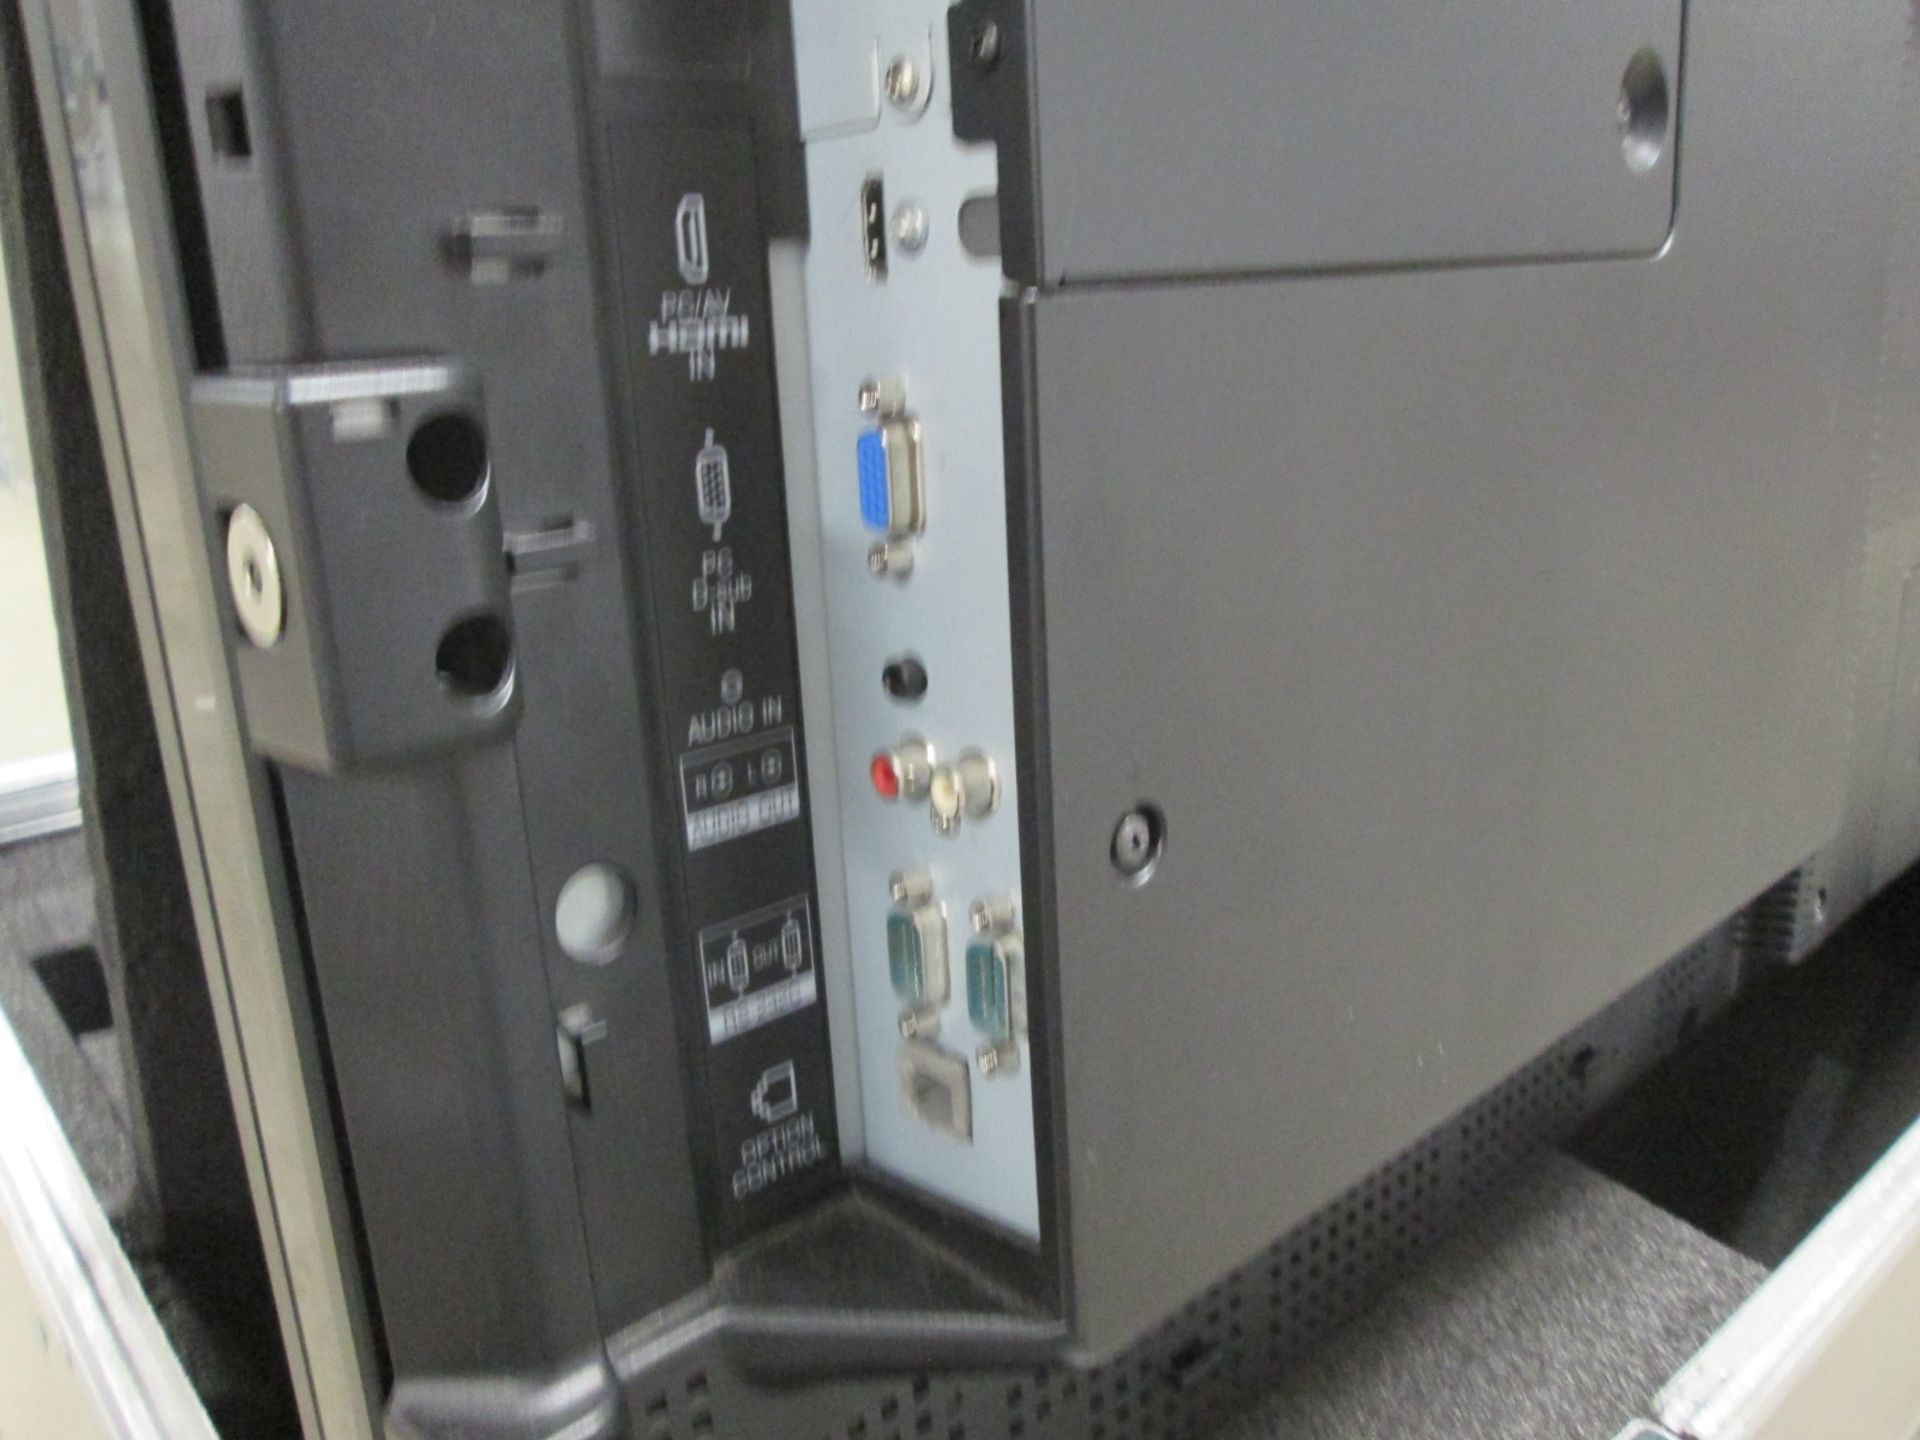 Sharp 70" LCD Colour Monitor, Model PN-E702, S/N 4C000536, In flight case with backplate and remote - Image 4 of 6